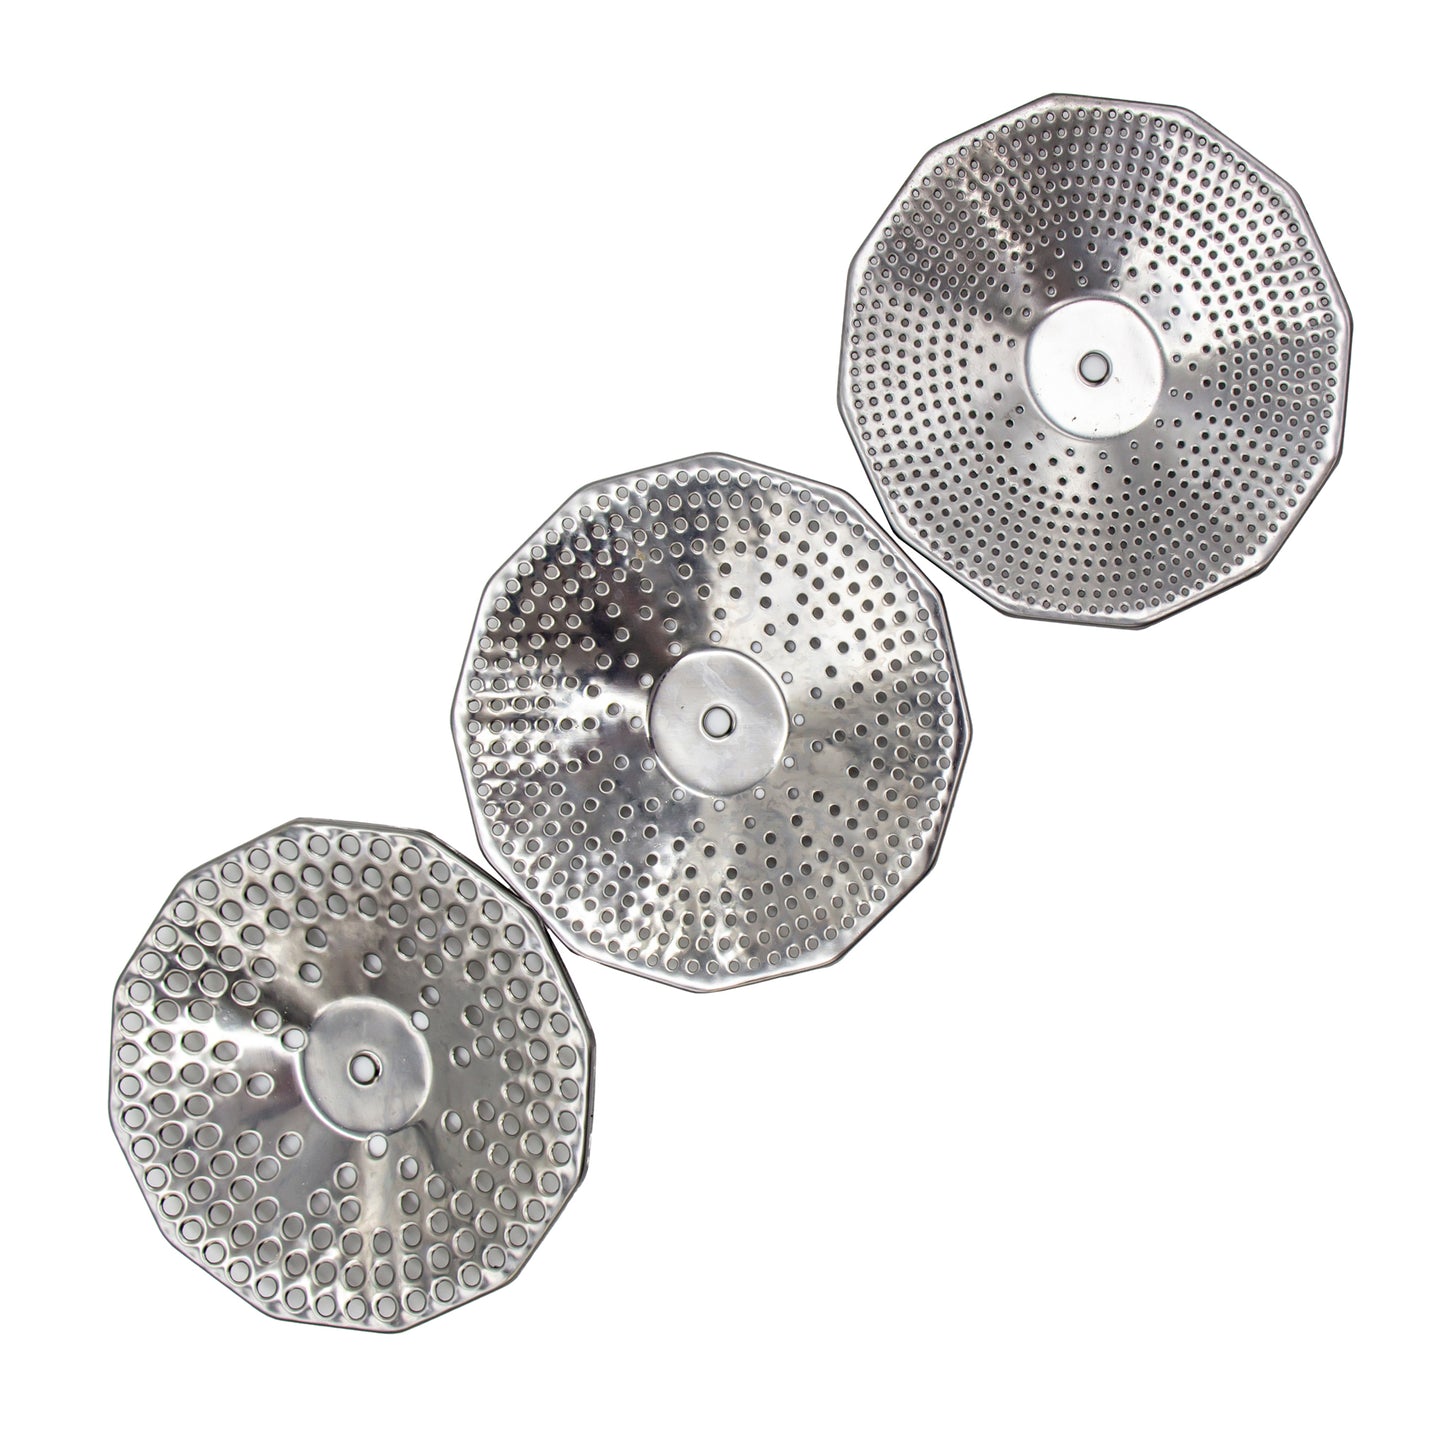 Three stainless steel discs with varying size holes for finer or coarser milling.